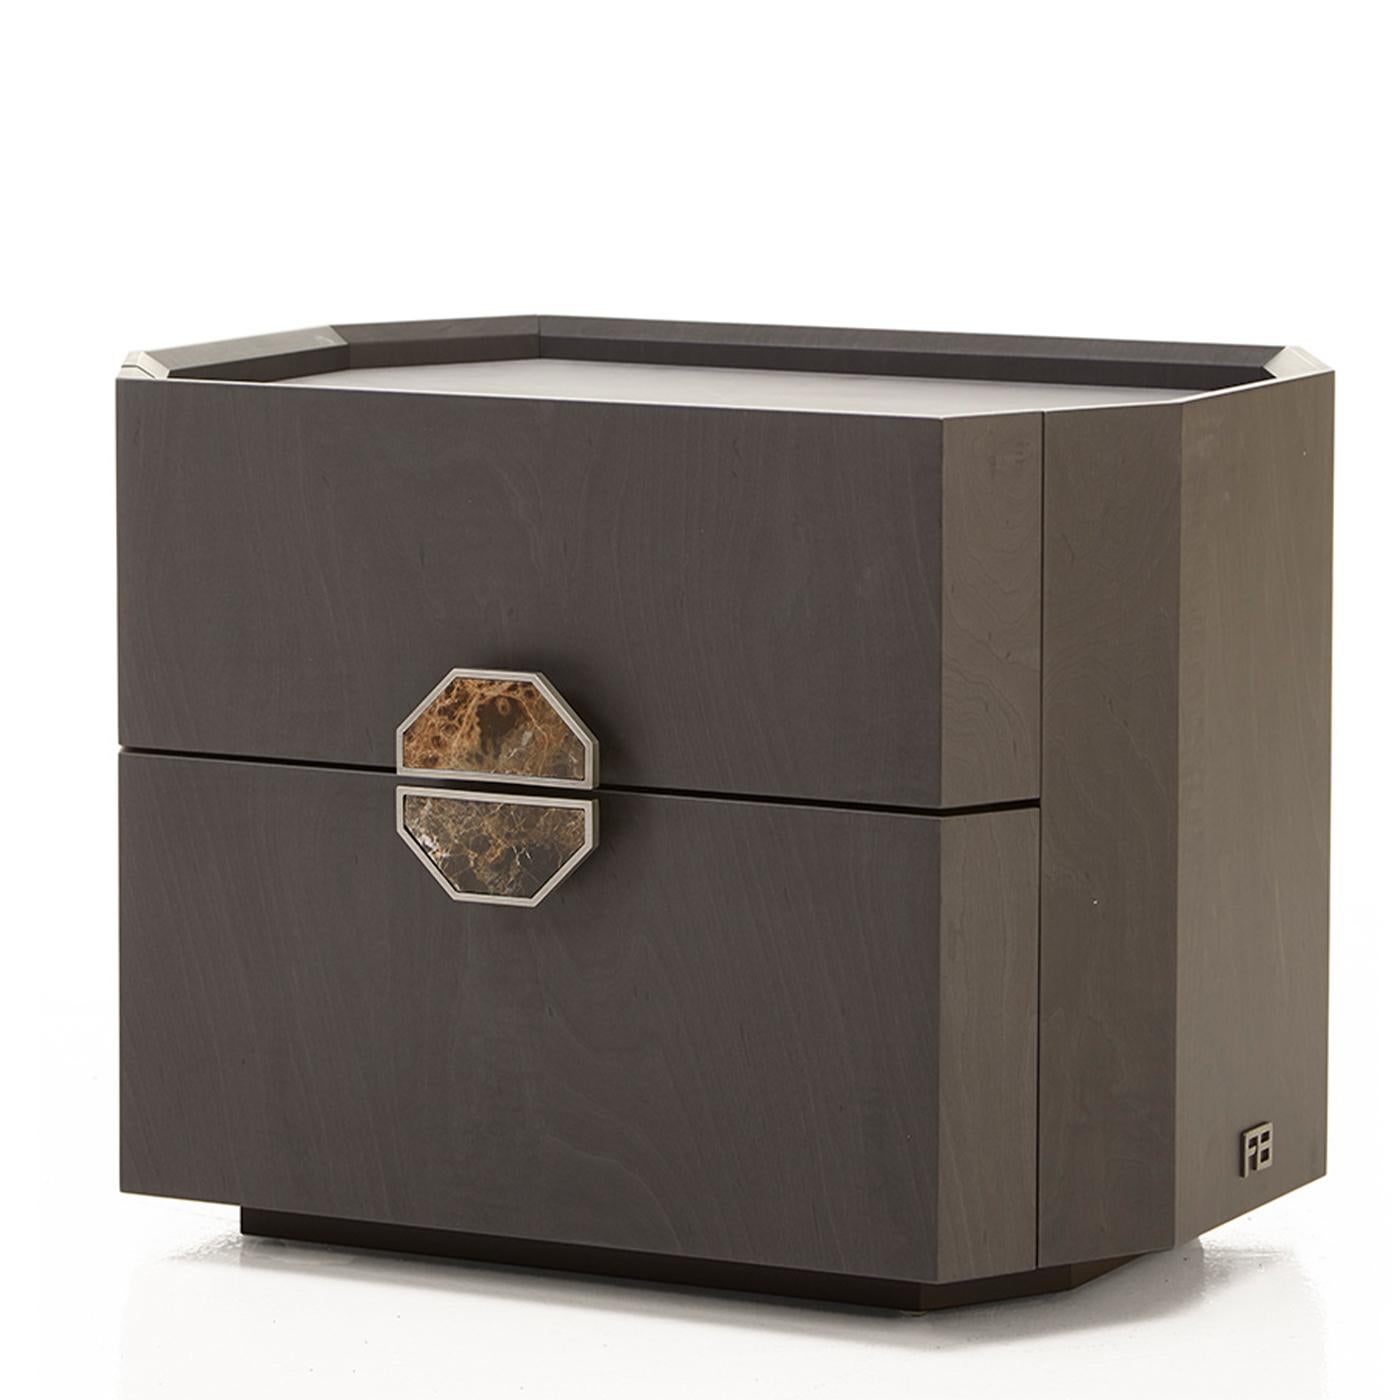 Chest of 2 drawers with wooden top, metal trims, opening with handles - Pantera Matt finish, Burnished brass metal.